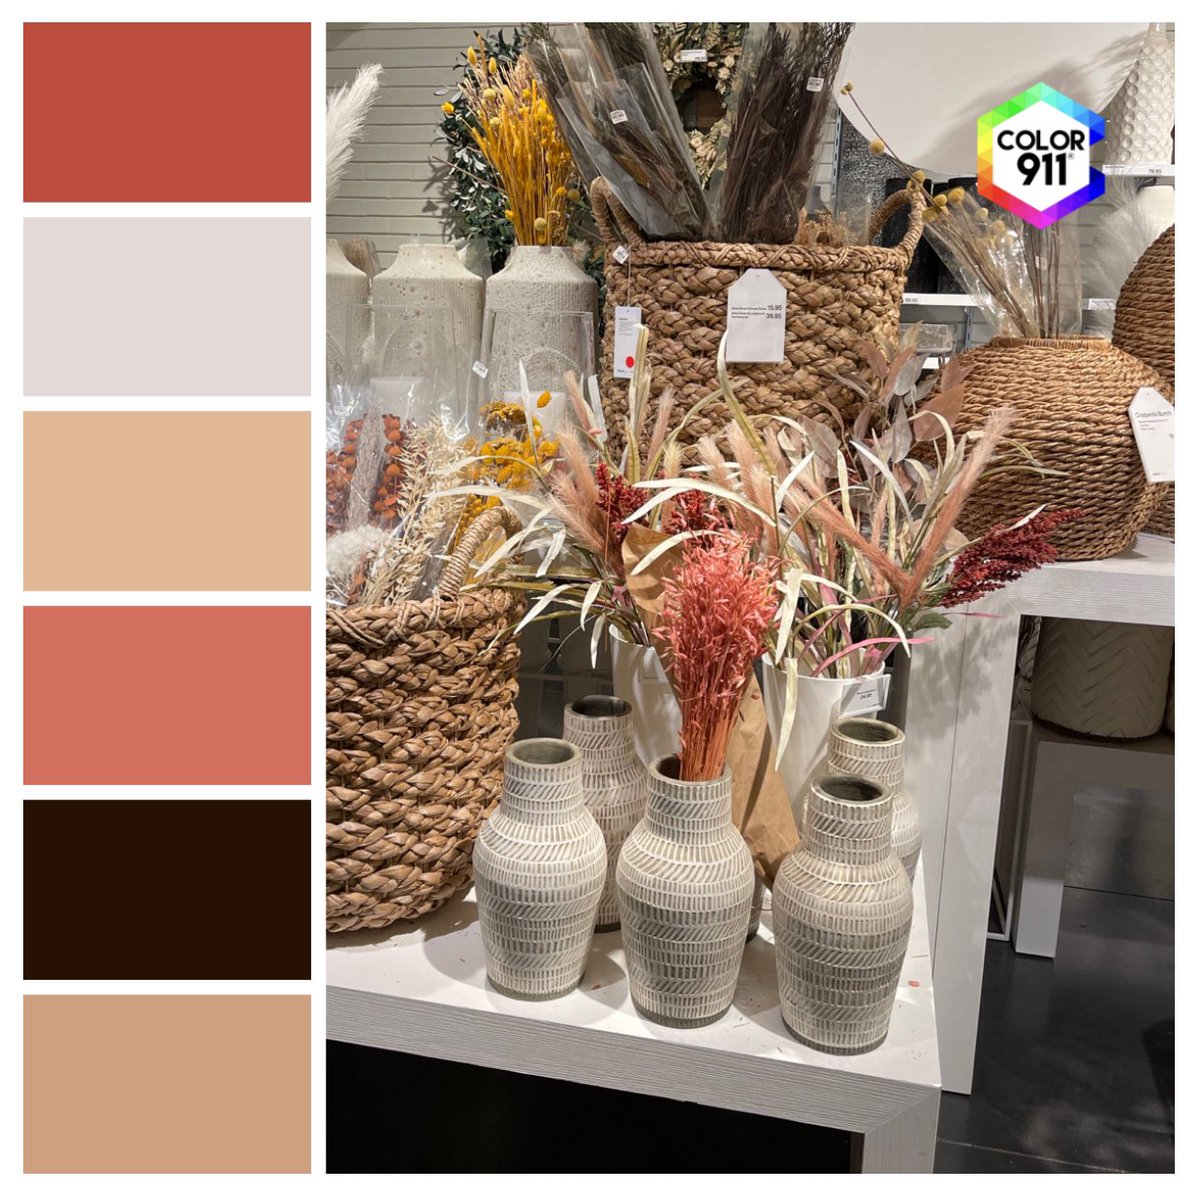 Sharing a little #color #inspiration to start your day. Ever see something that inspires you, makes you smile? Capture and save it with the #Color911 #app. Give it a try: Color911.com #homedesign #homedecor #decor #style #trending #colours